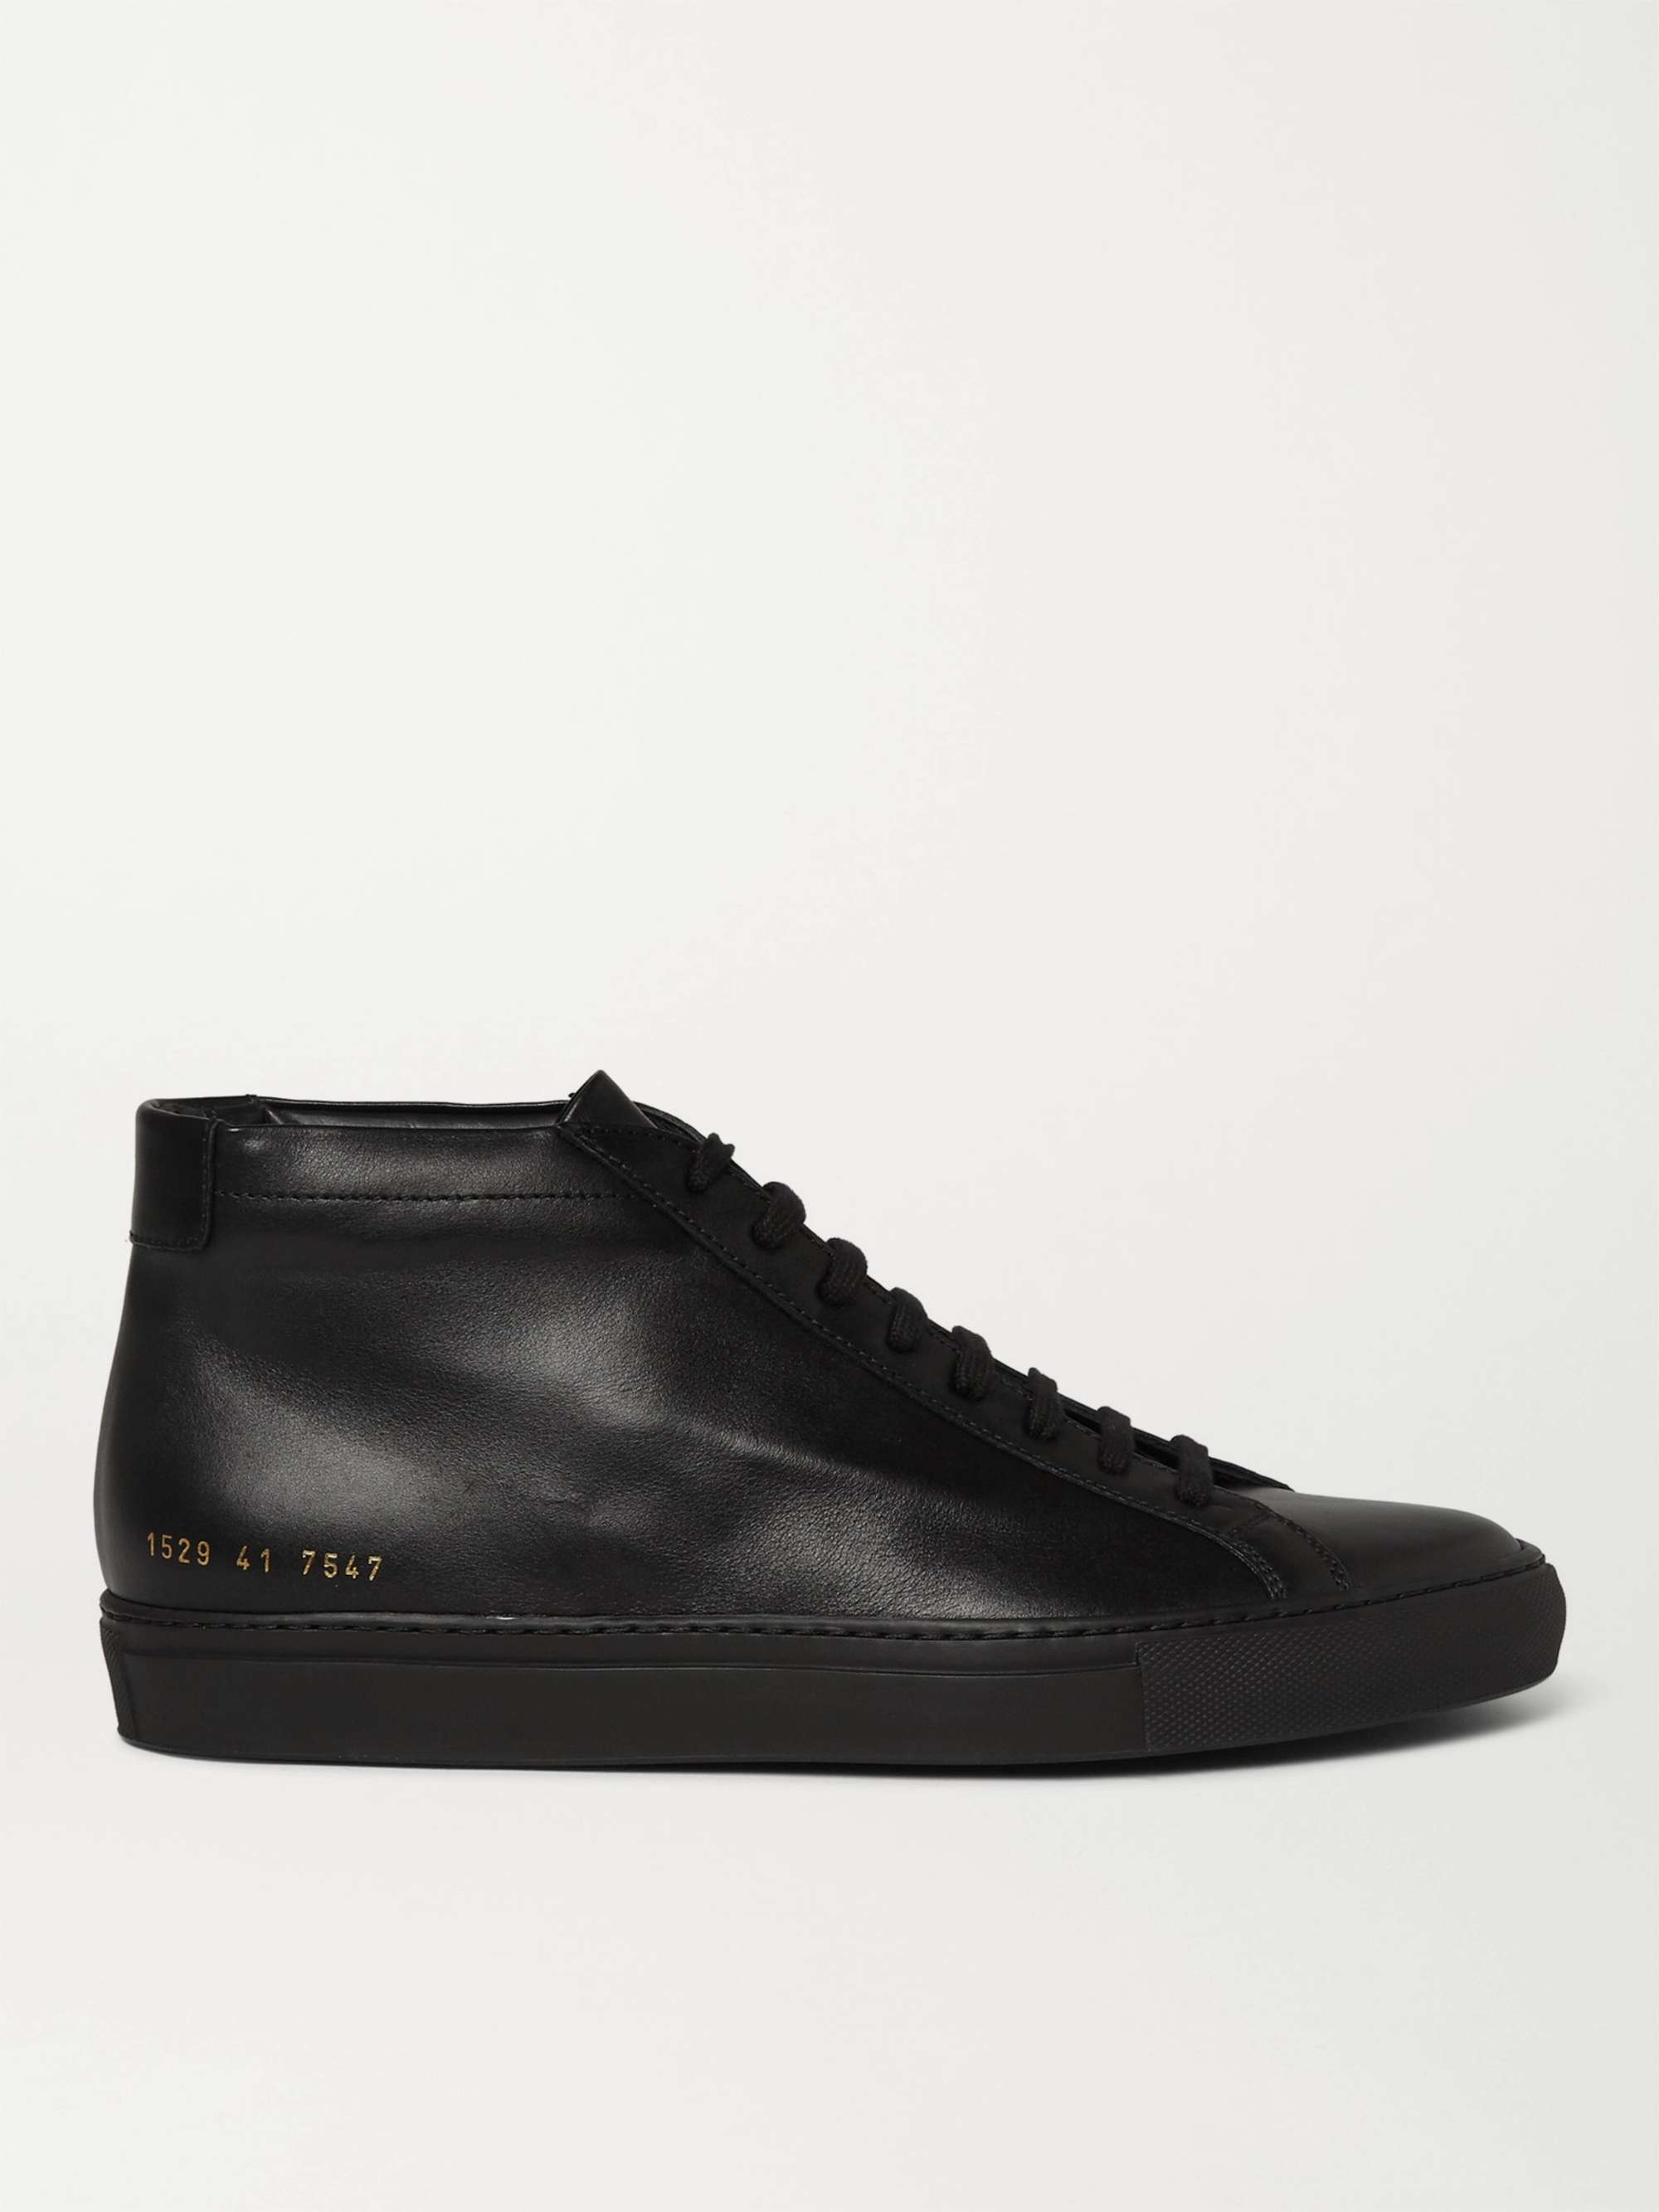 Sneakers Common Projects Men Sneakers COMMON PROJECTS 44 black Men Shoes Common Projects Men Sneakers Common Projects Men 